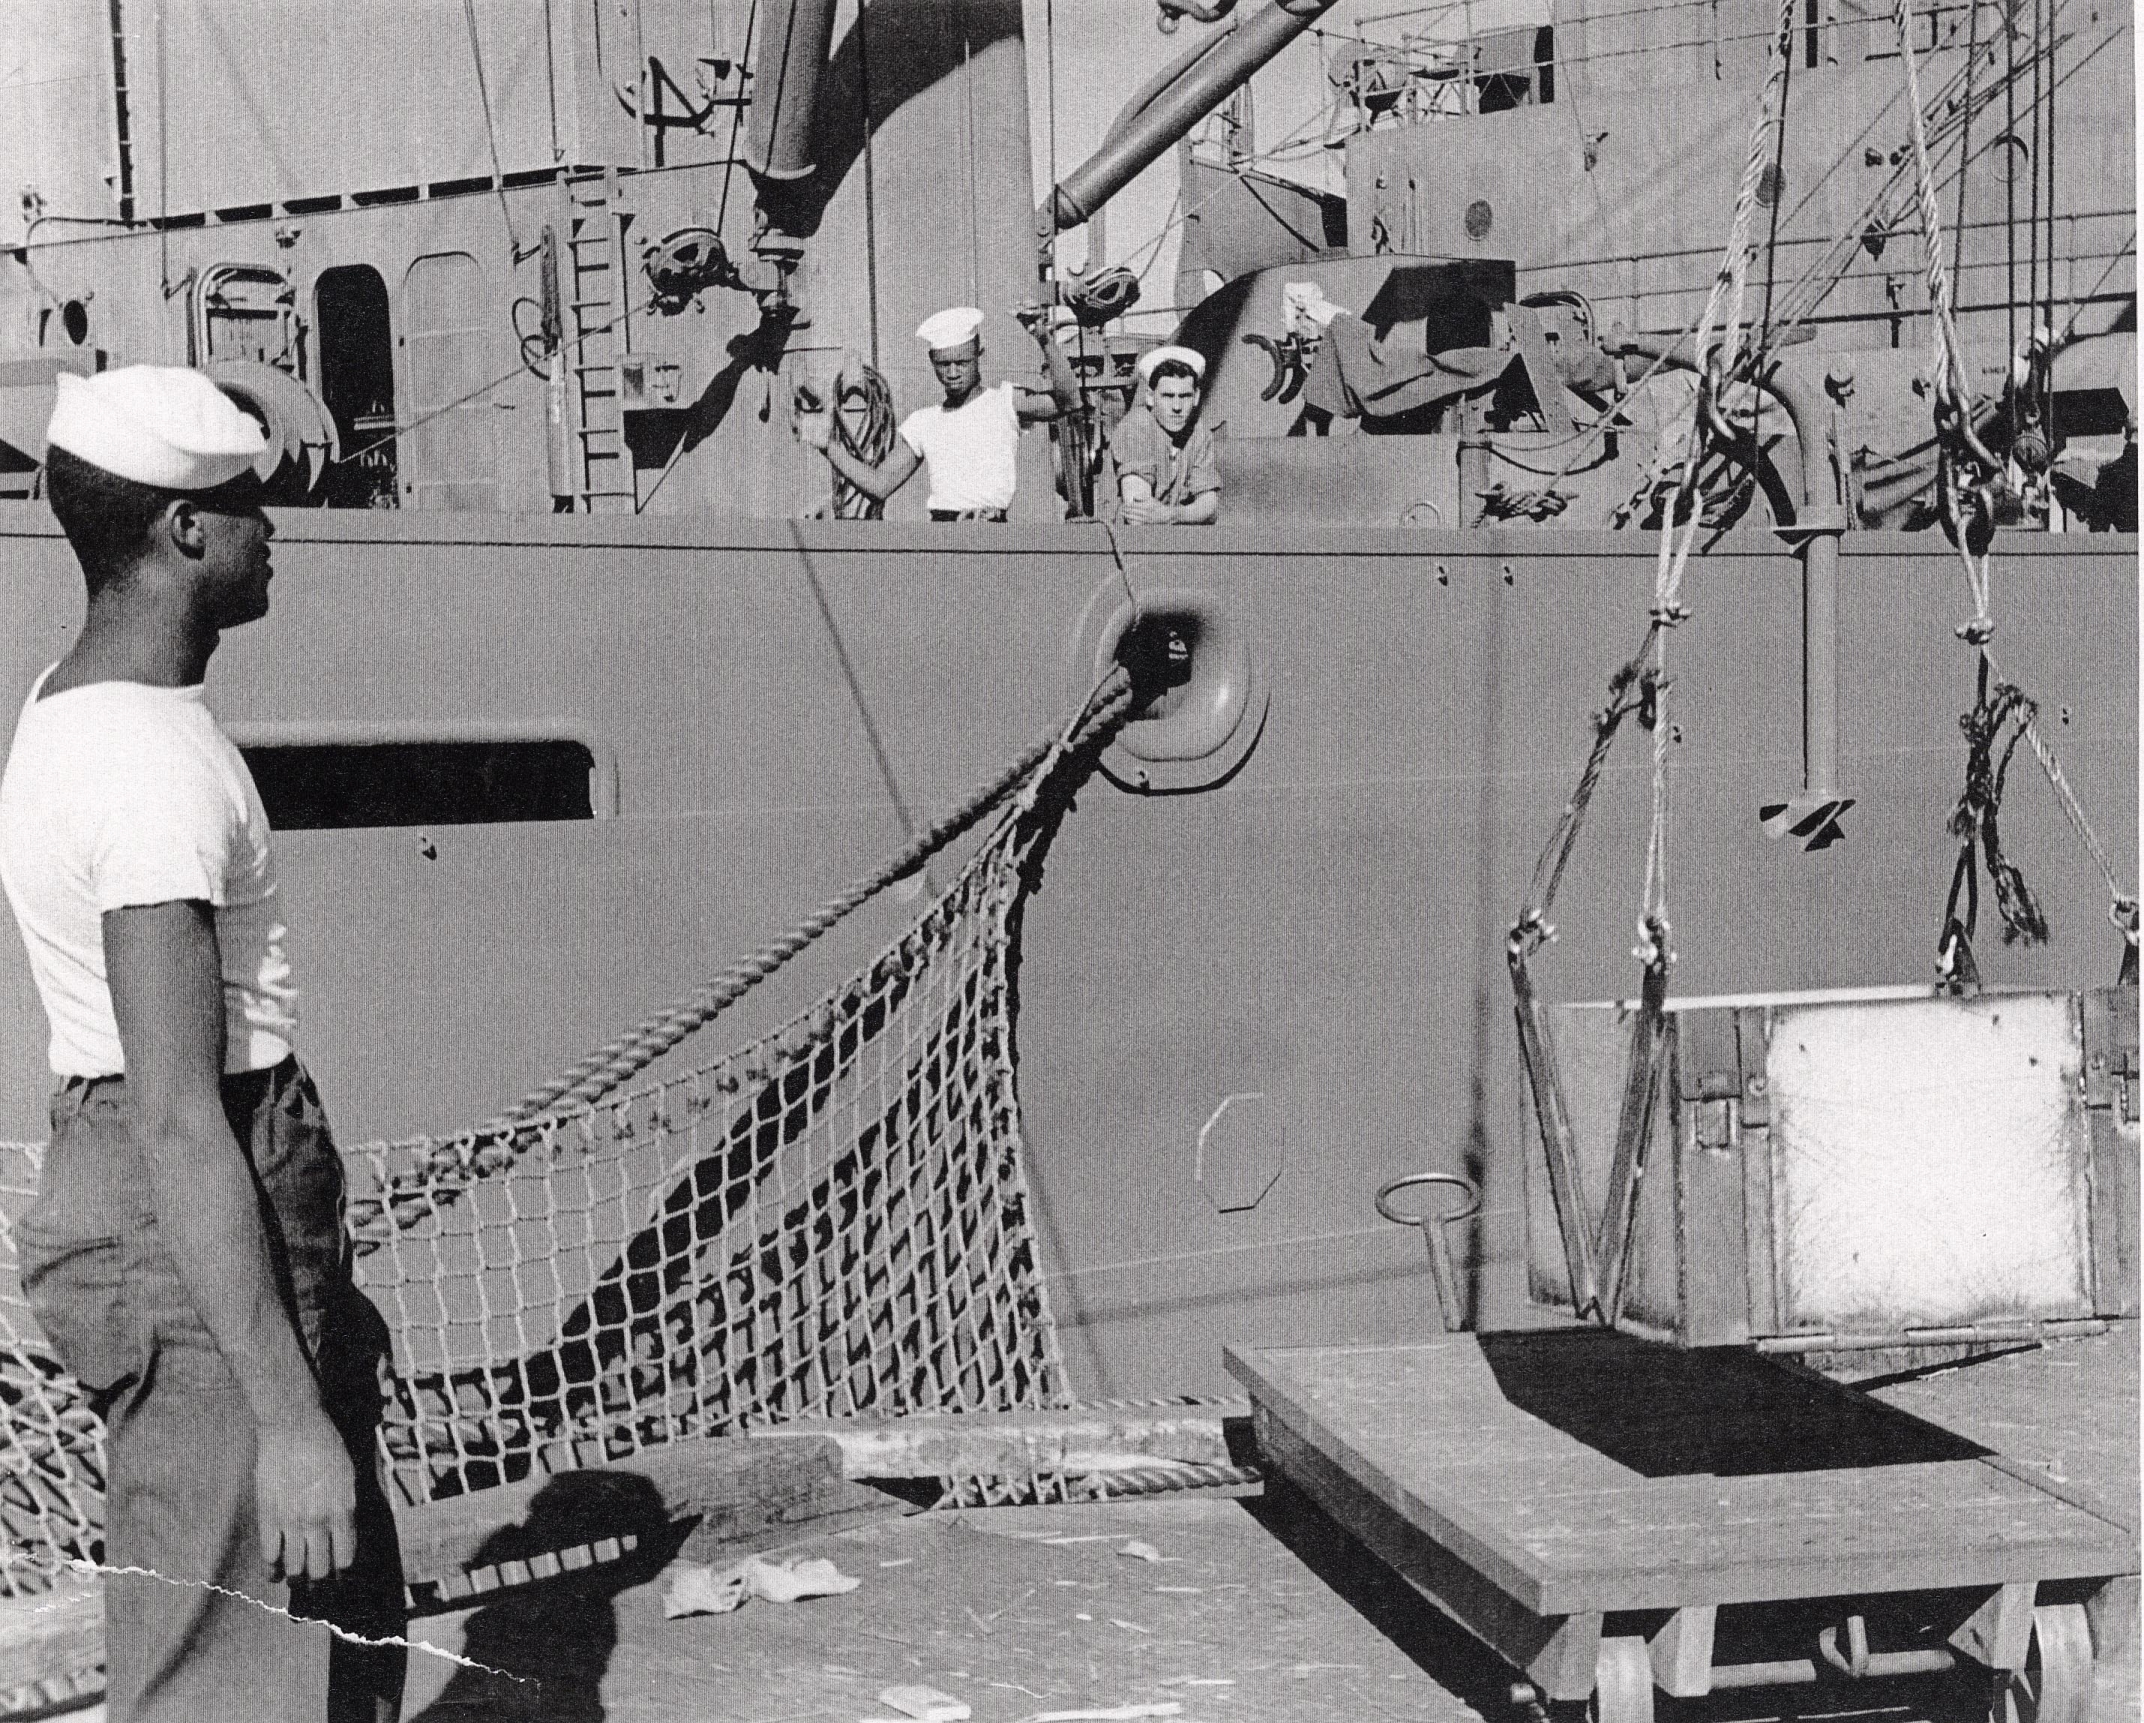 African-American sailors loading munitions aboard ships at Port Chicago, California, United States, 1943-44.